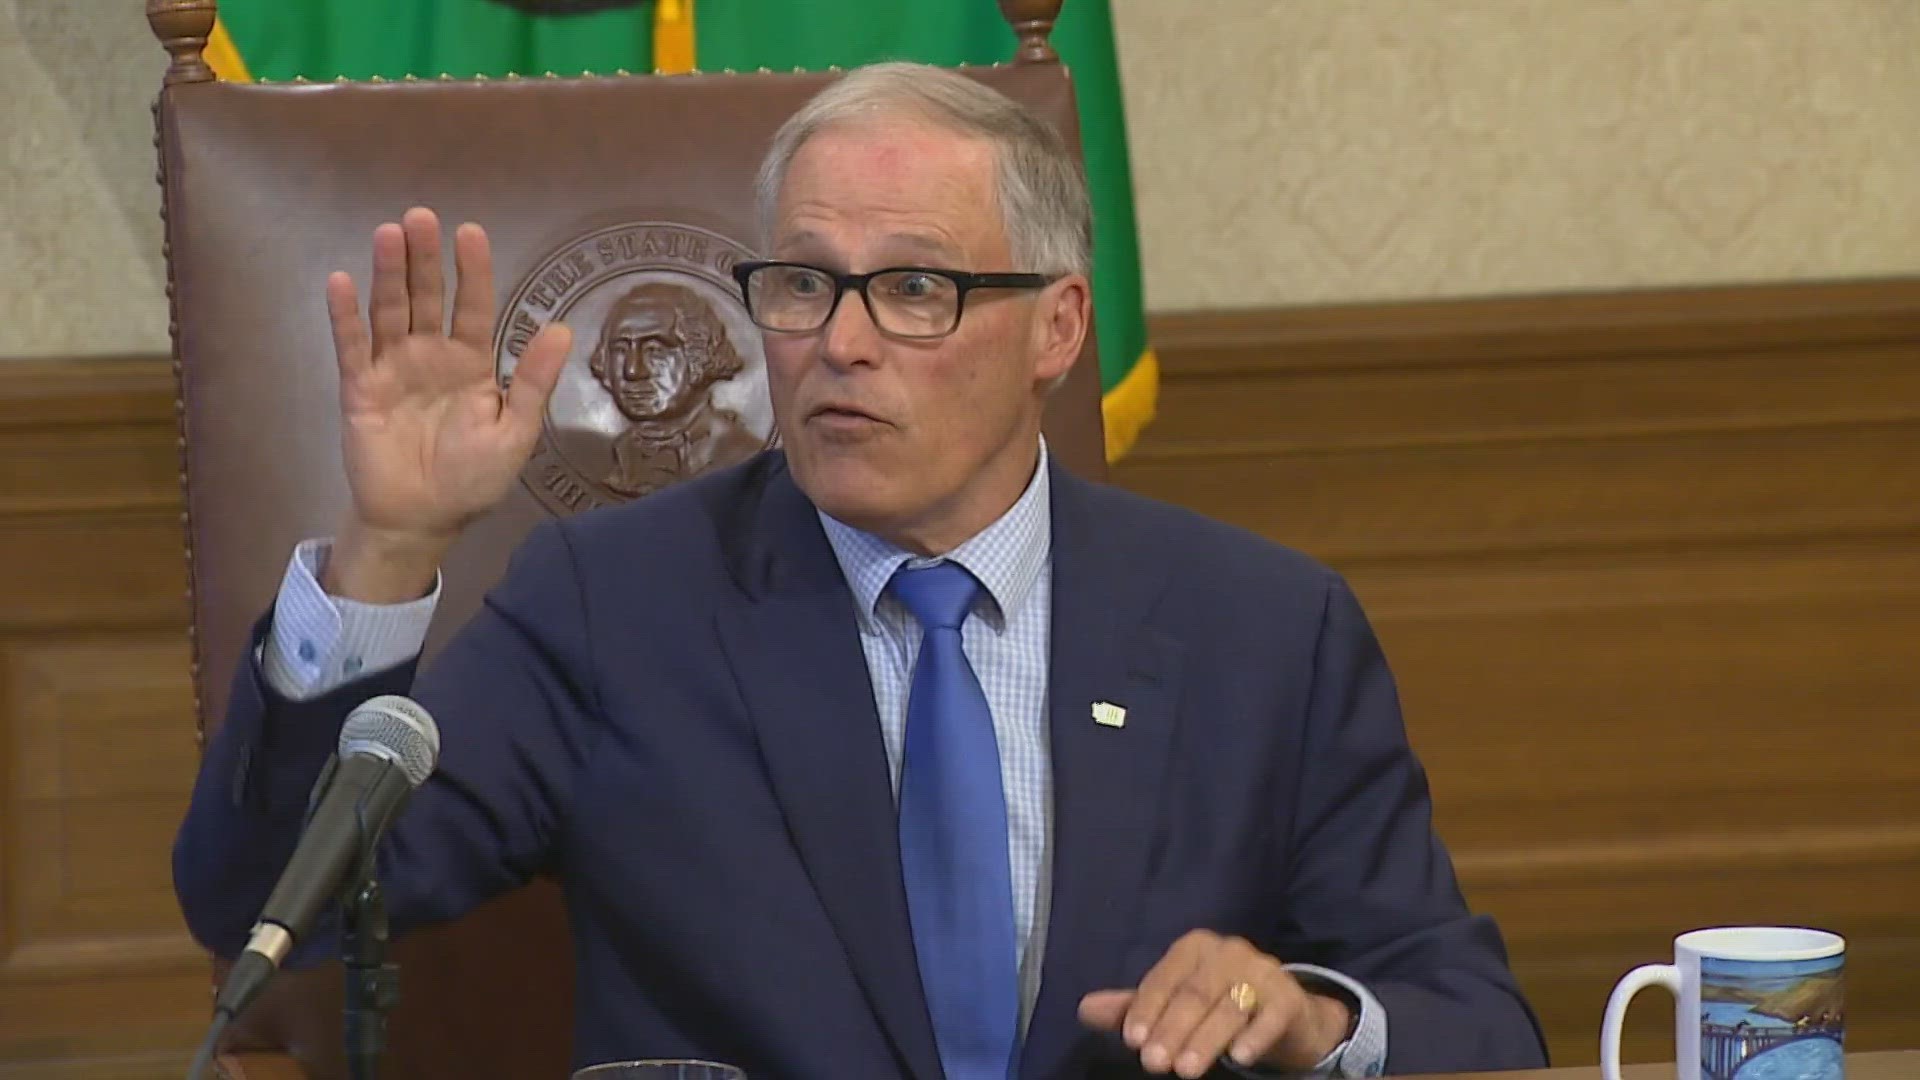 Inslee was last reelected in 2020, becoming the second governor in Washington state to be elected to a third consecutive term.